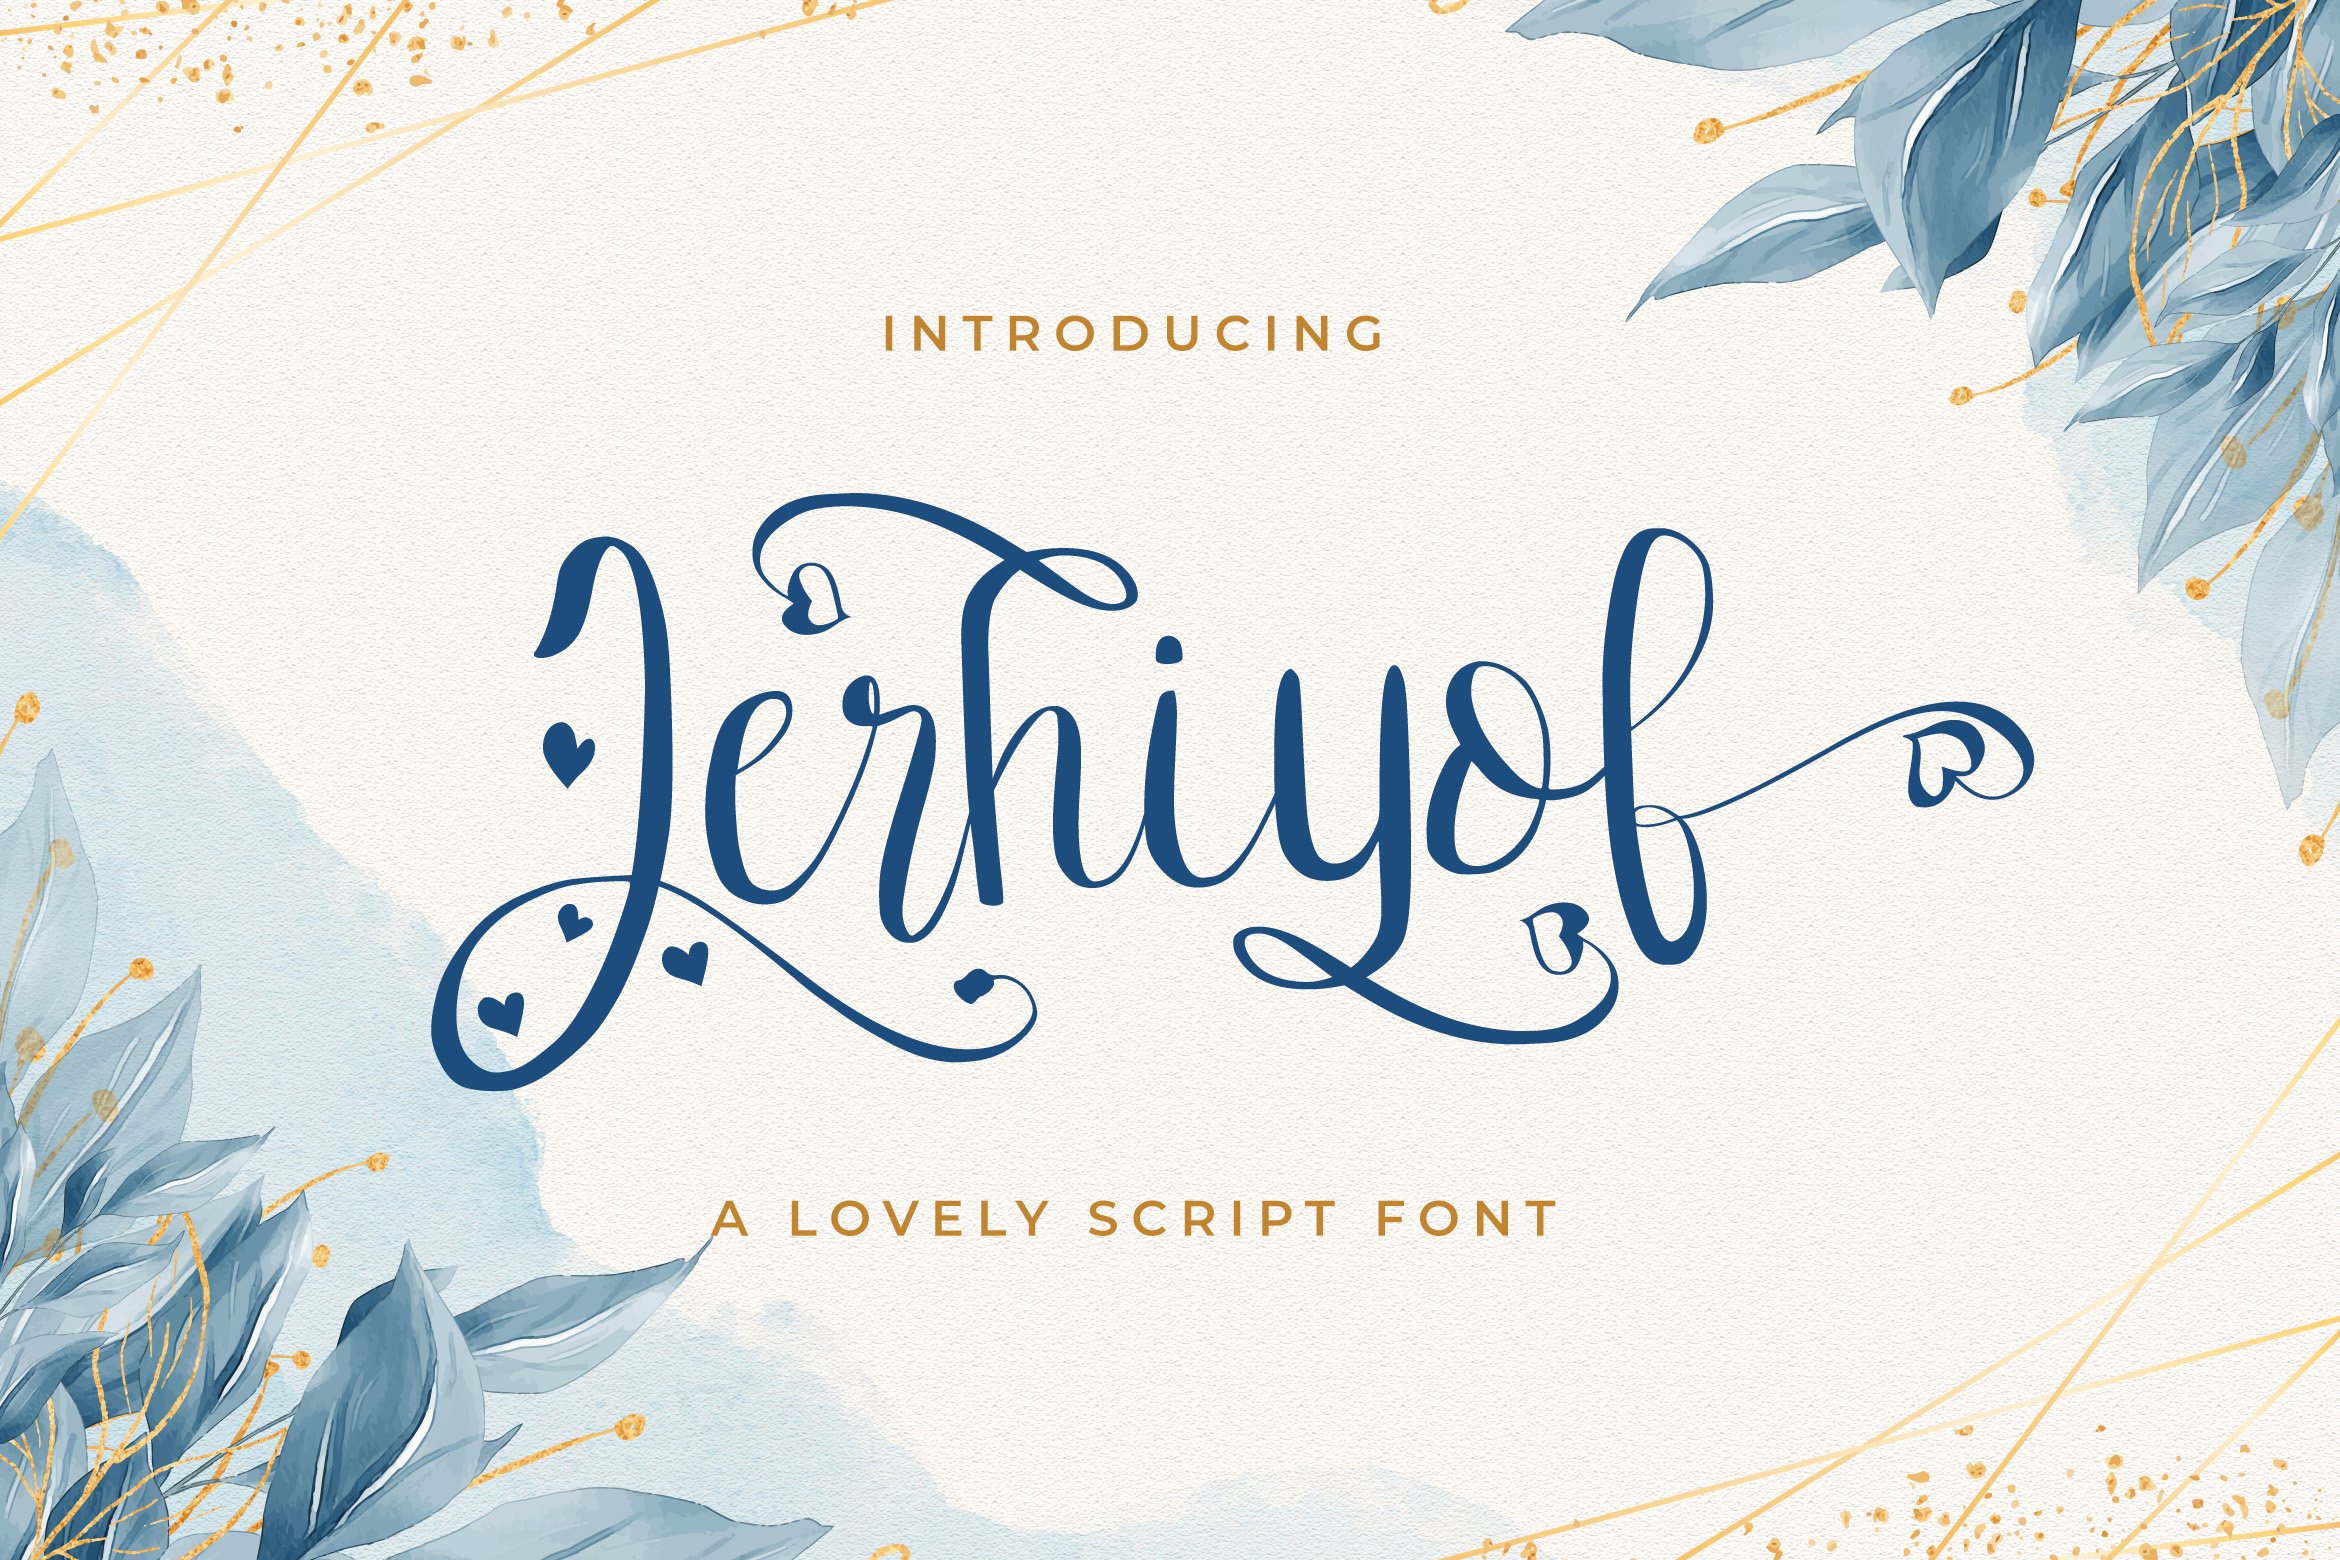 Jerhiyof - Lovely Script Font cover image.